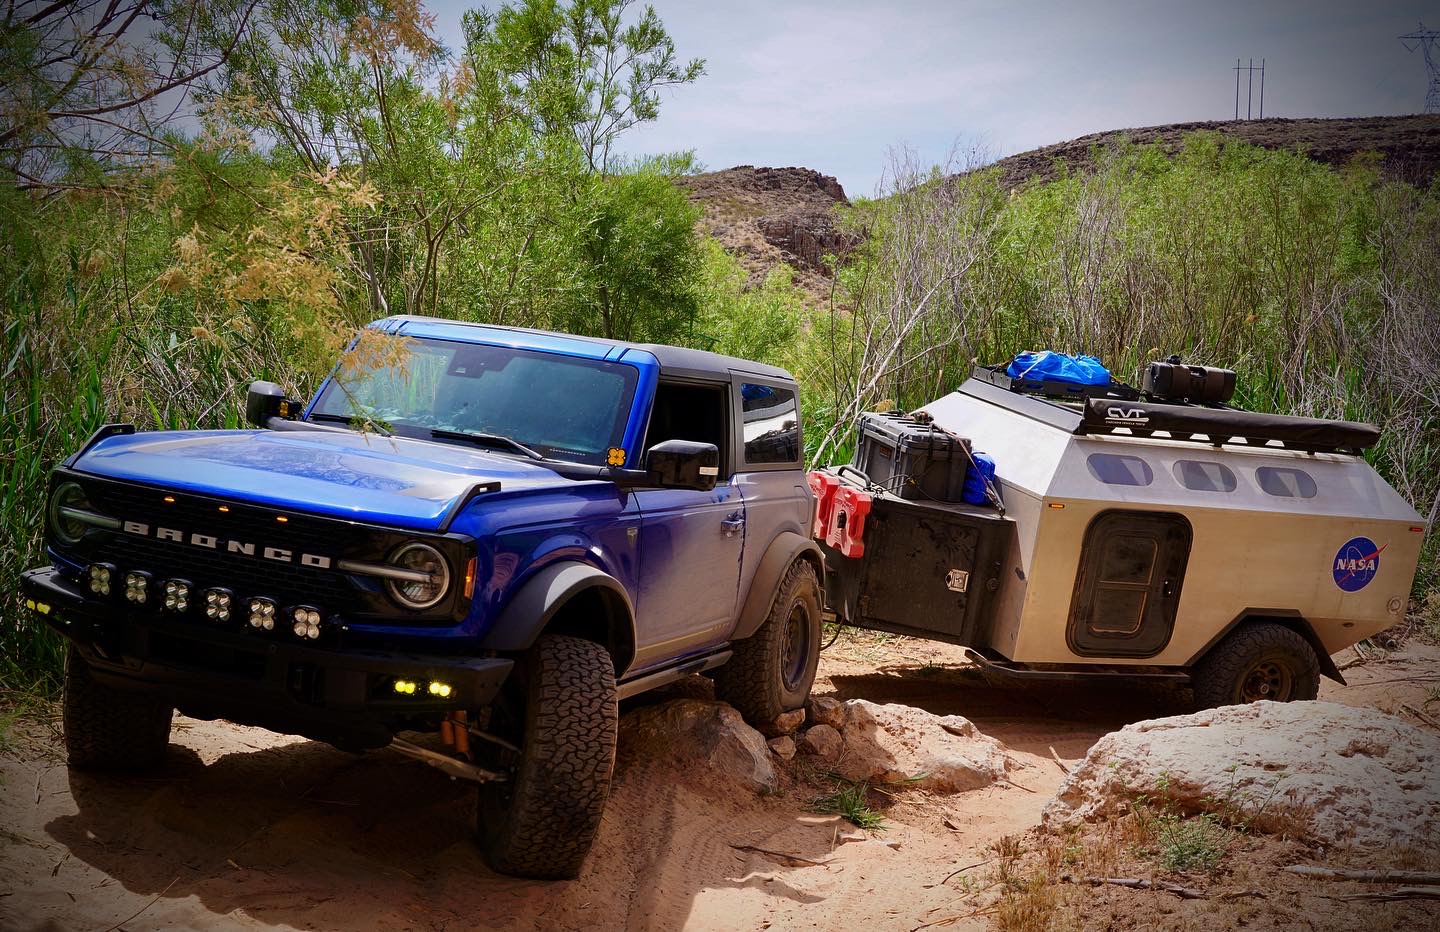 Ford Bronco Off Road Towing (Bronco + Mammoth Overland set-up) B728DAC2-35DC-4BEA-B64A-3EAD5CFC7077